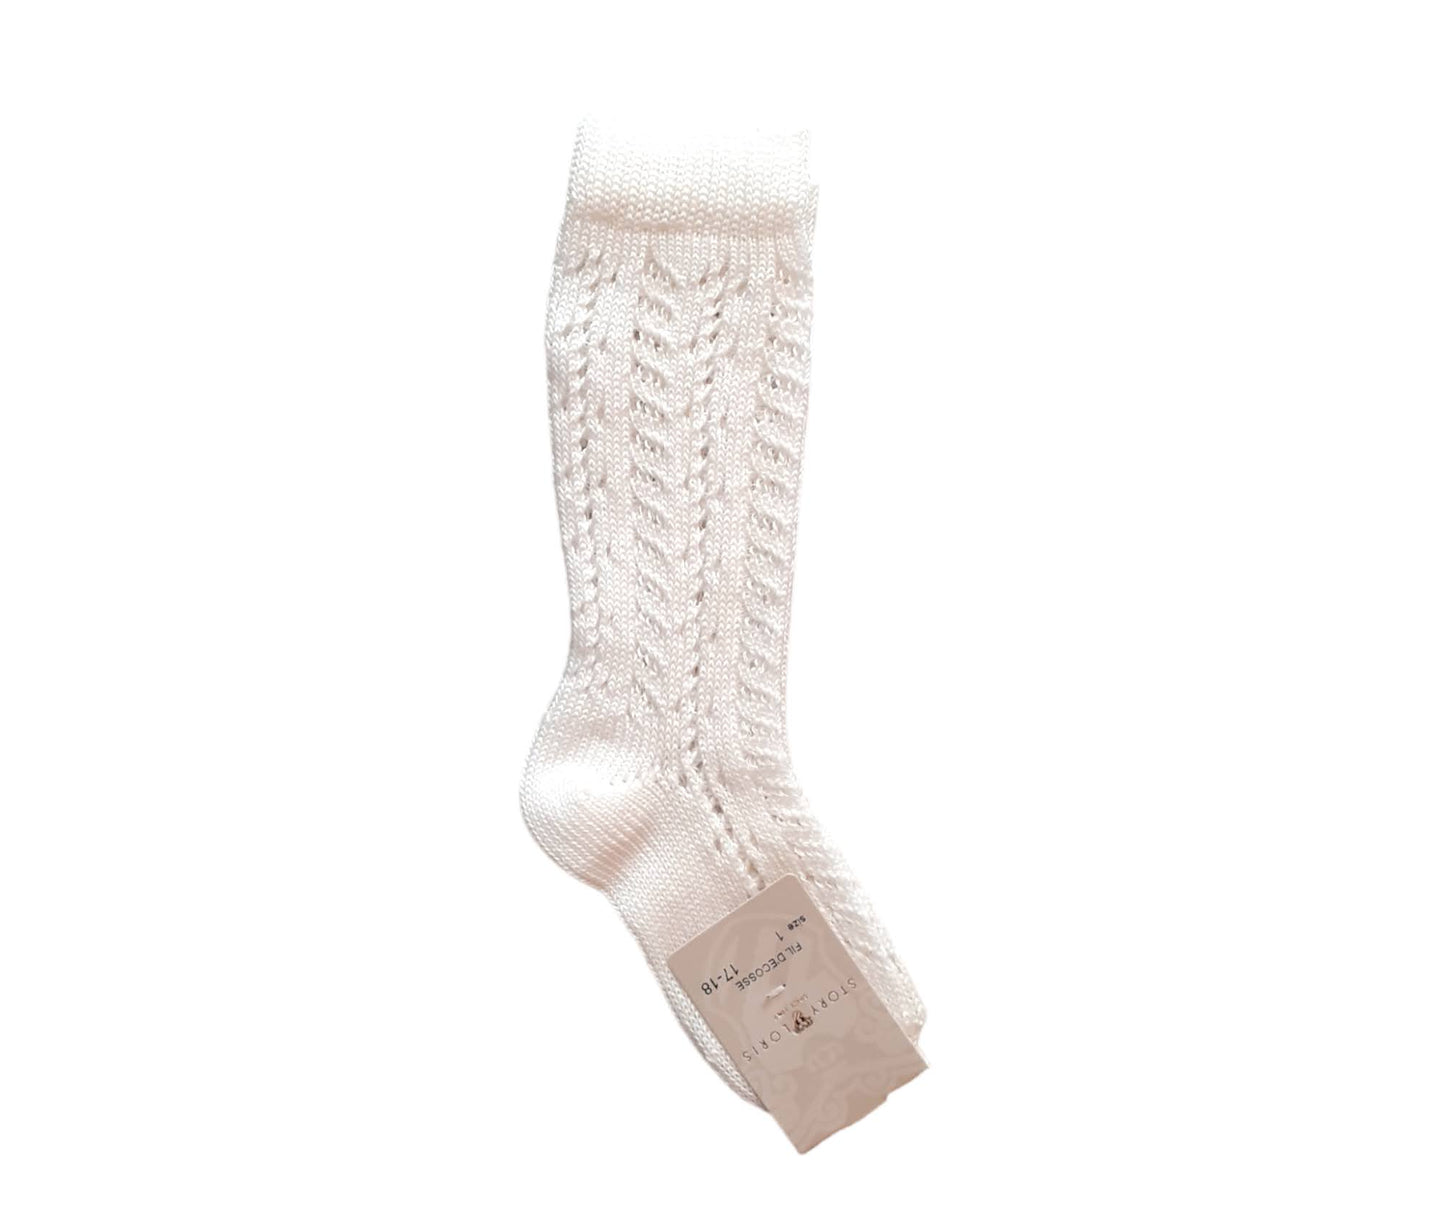 STORY LORIS Long Ivory Perforated Cotton Thread Sock